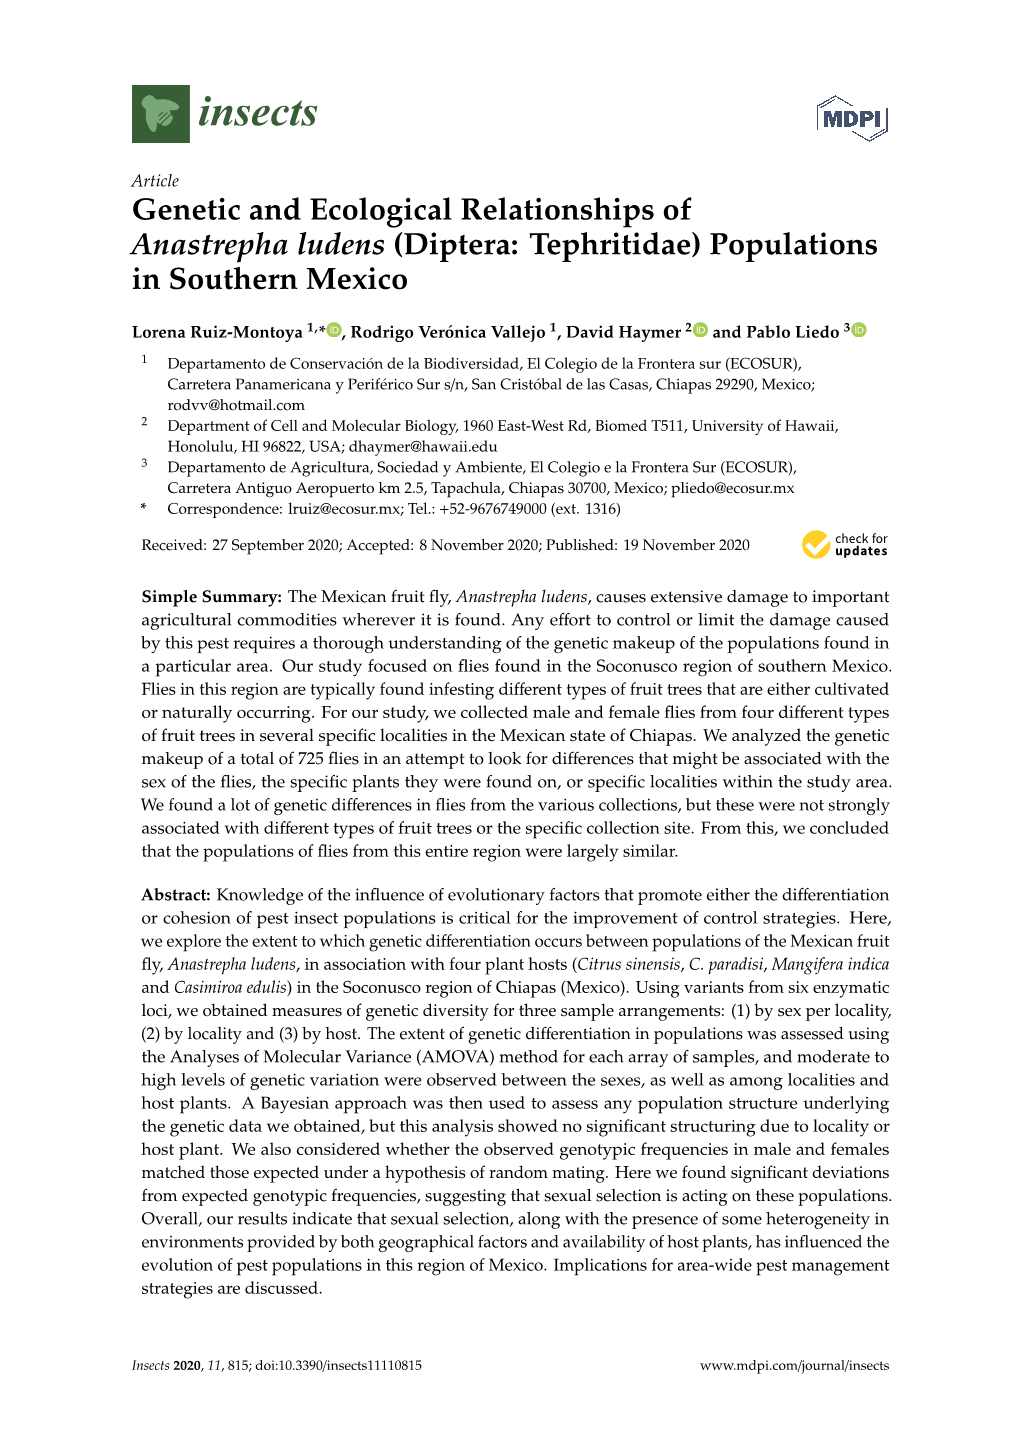 Genetic and Ecological Relationships of Anastrepha Ludens (Diptera: Tephritidae) Populations in Southern Mexico